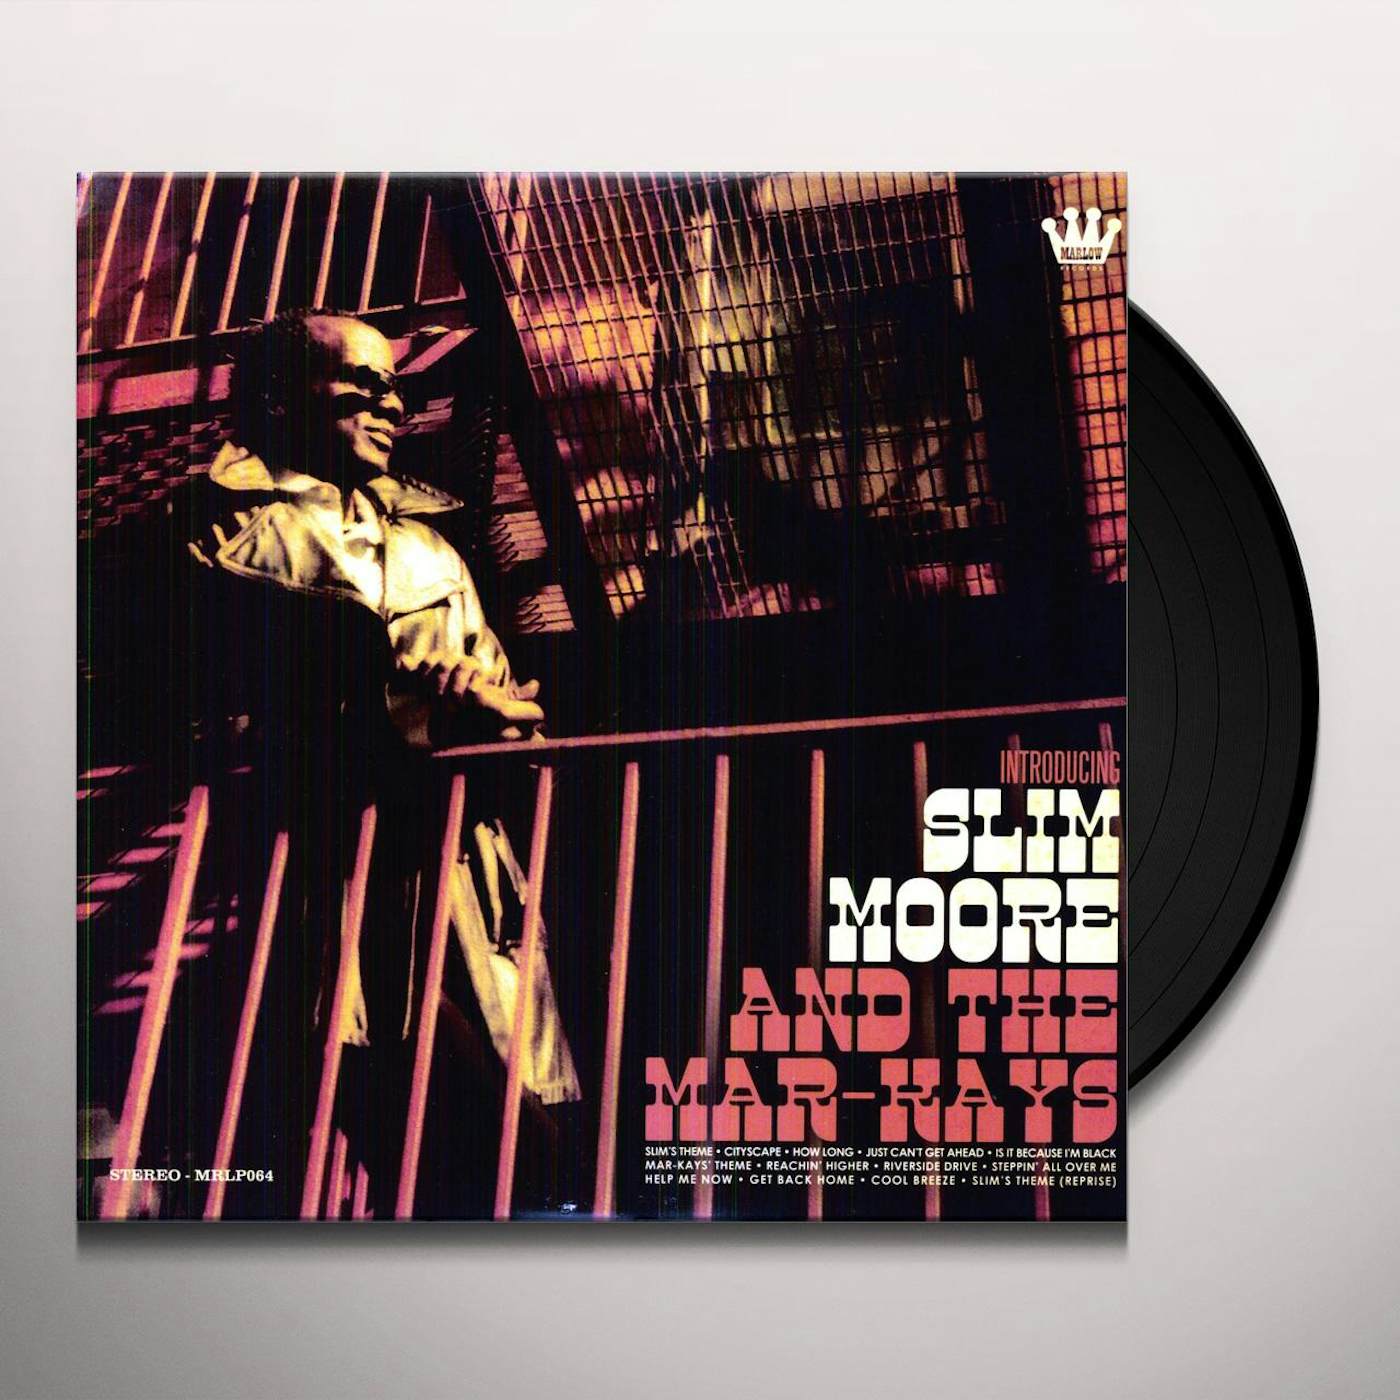 Introducing Slim Moore and the Mar-Kays Vinyl Record